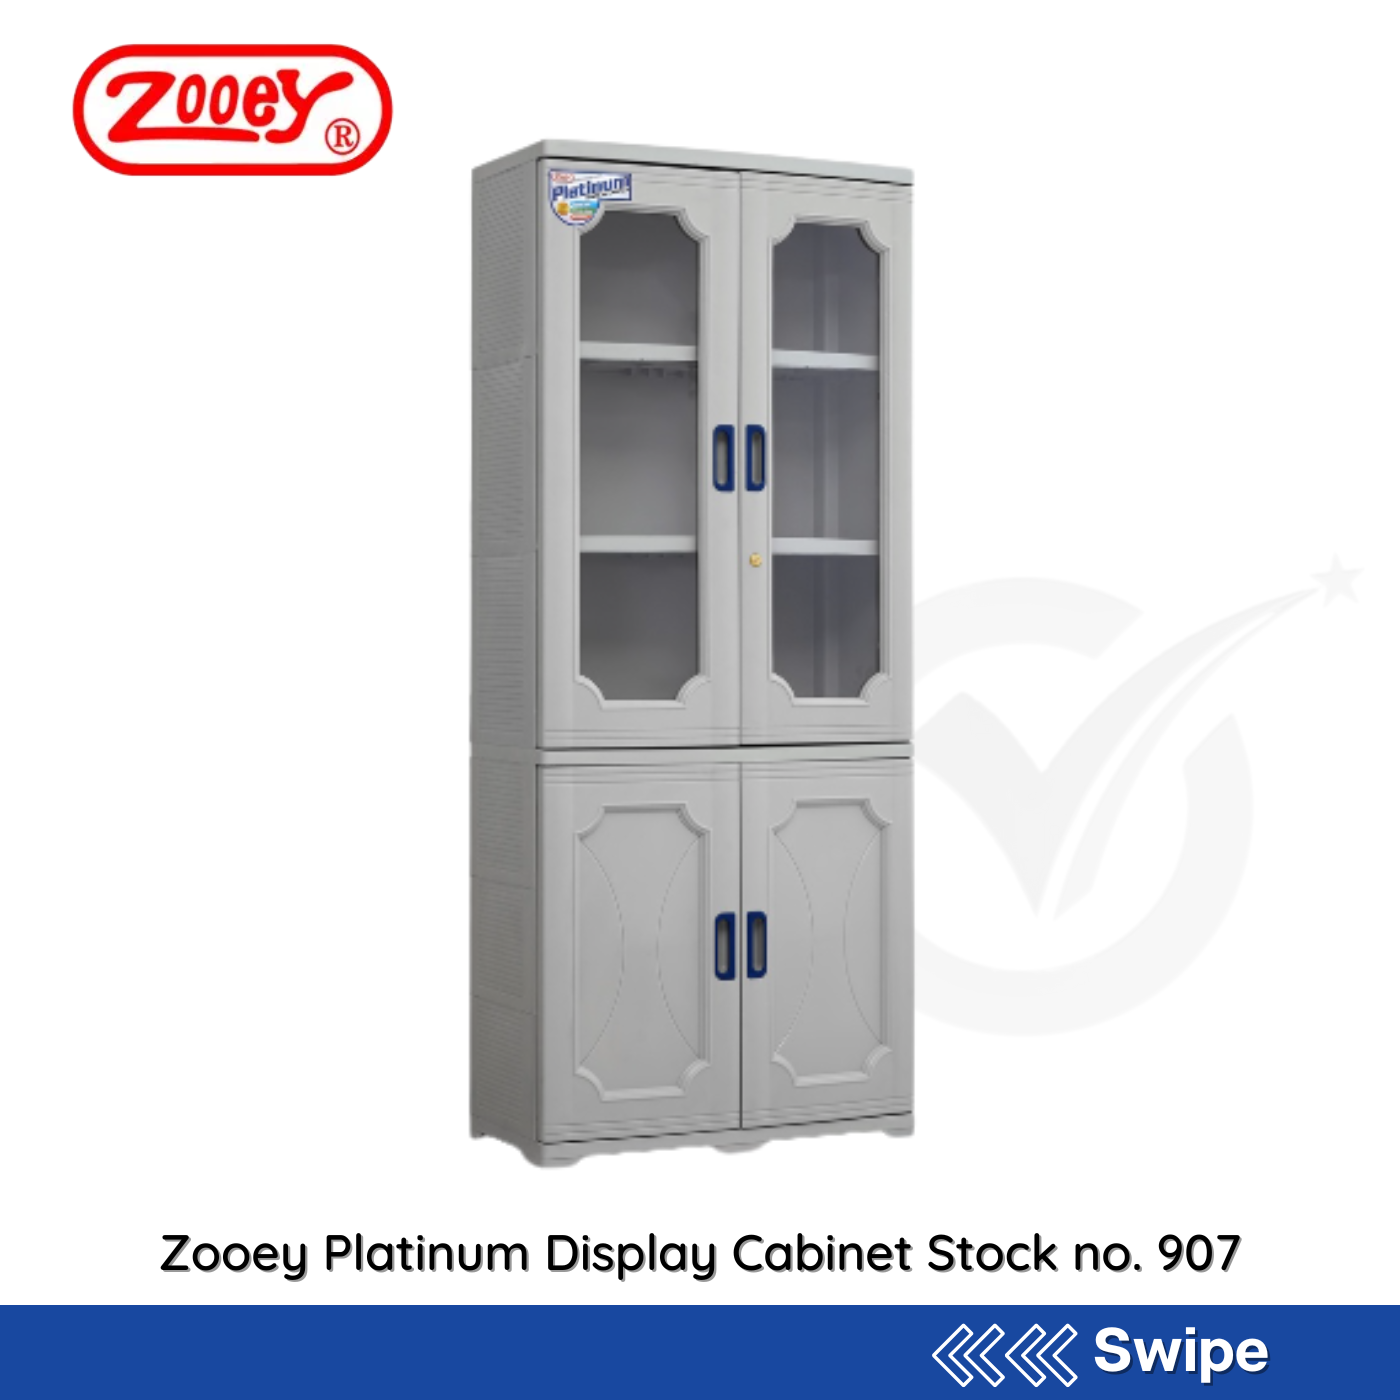 Zooey Platinum Display Cabinet Stock no. 907 - People's Choice Marketing